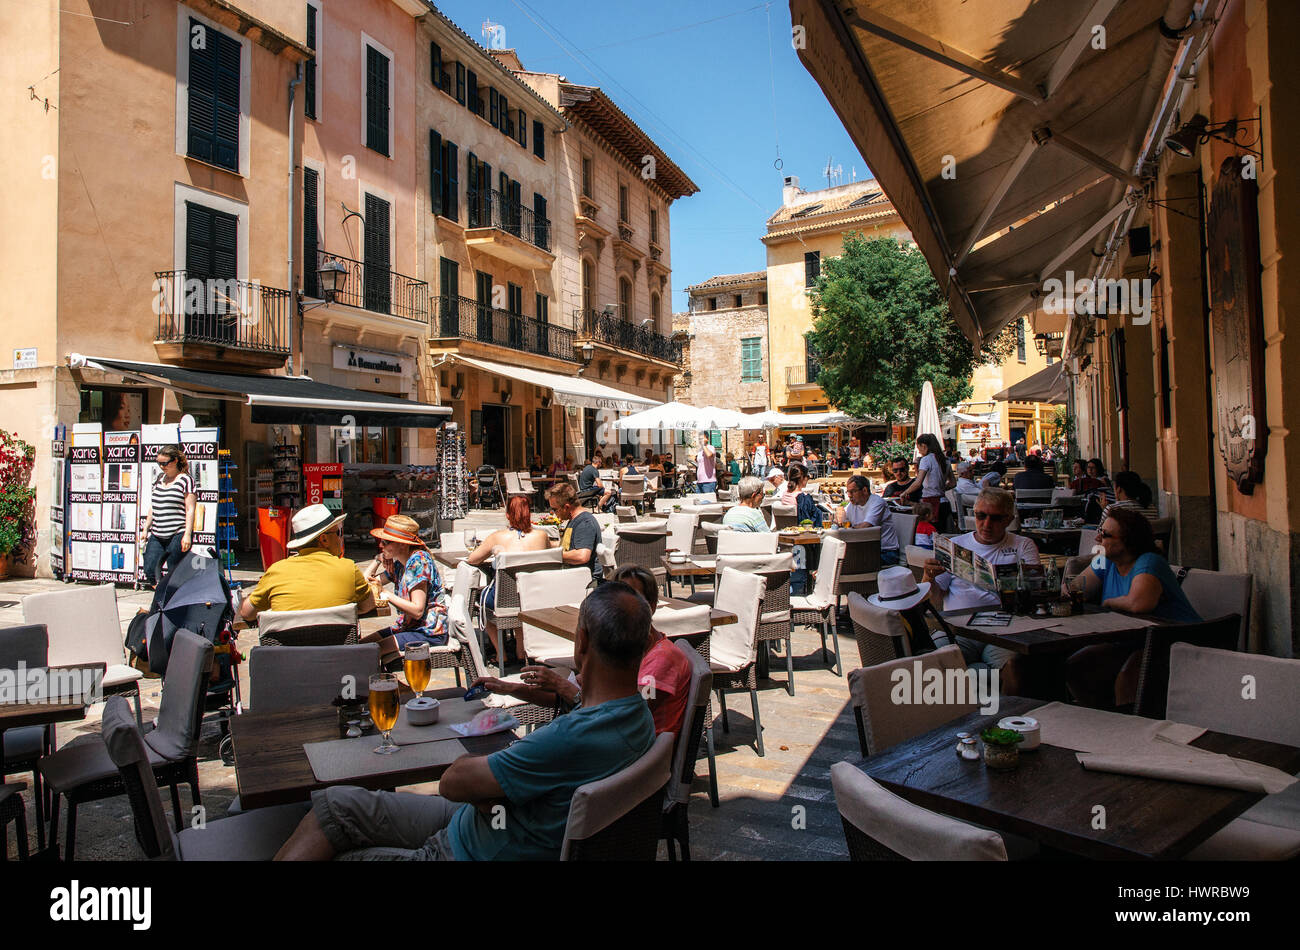 ALCUDIA, MAJORCA, SPAIN - May 23, 2015. Crowded square of Alcudia. People relax and enjoy their drinks and food at an outdoor cafe terrace. Stock Photo